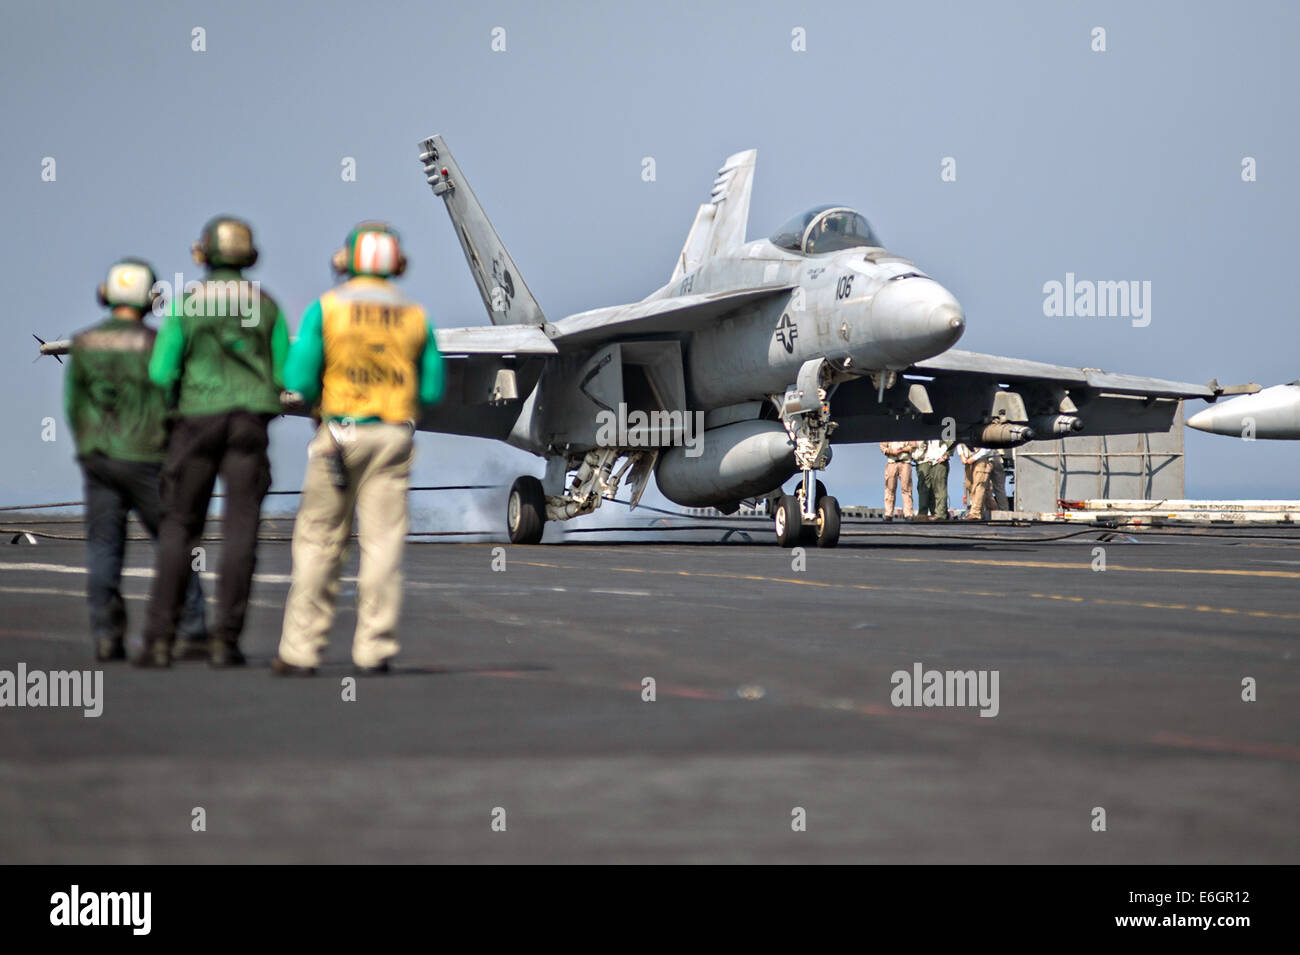 A US Navy F/A-18F Super Hornet fighter aircraft lands on the flight deck of the aircraft carrier USS George H.W. Bush after returning from a mission to support the Iraqi military August 14, 2014. President Obama authorized targeted airstrikes to protect U.S. personnel from extremists known as the Islamic State in Iraq and the Levant. Stock Photo